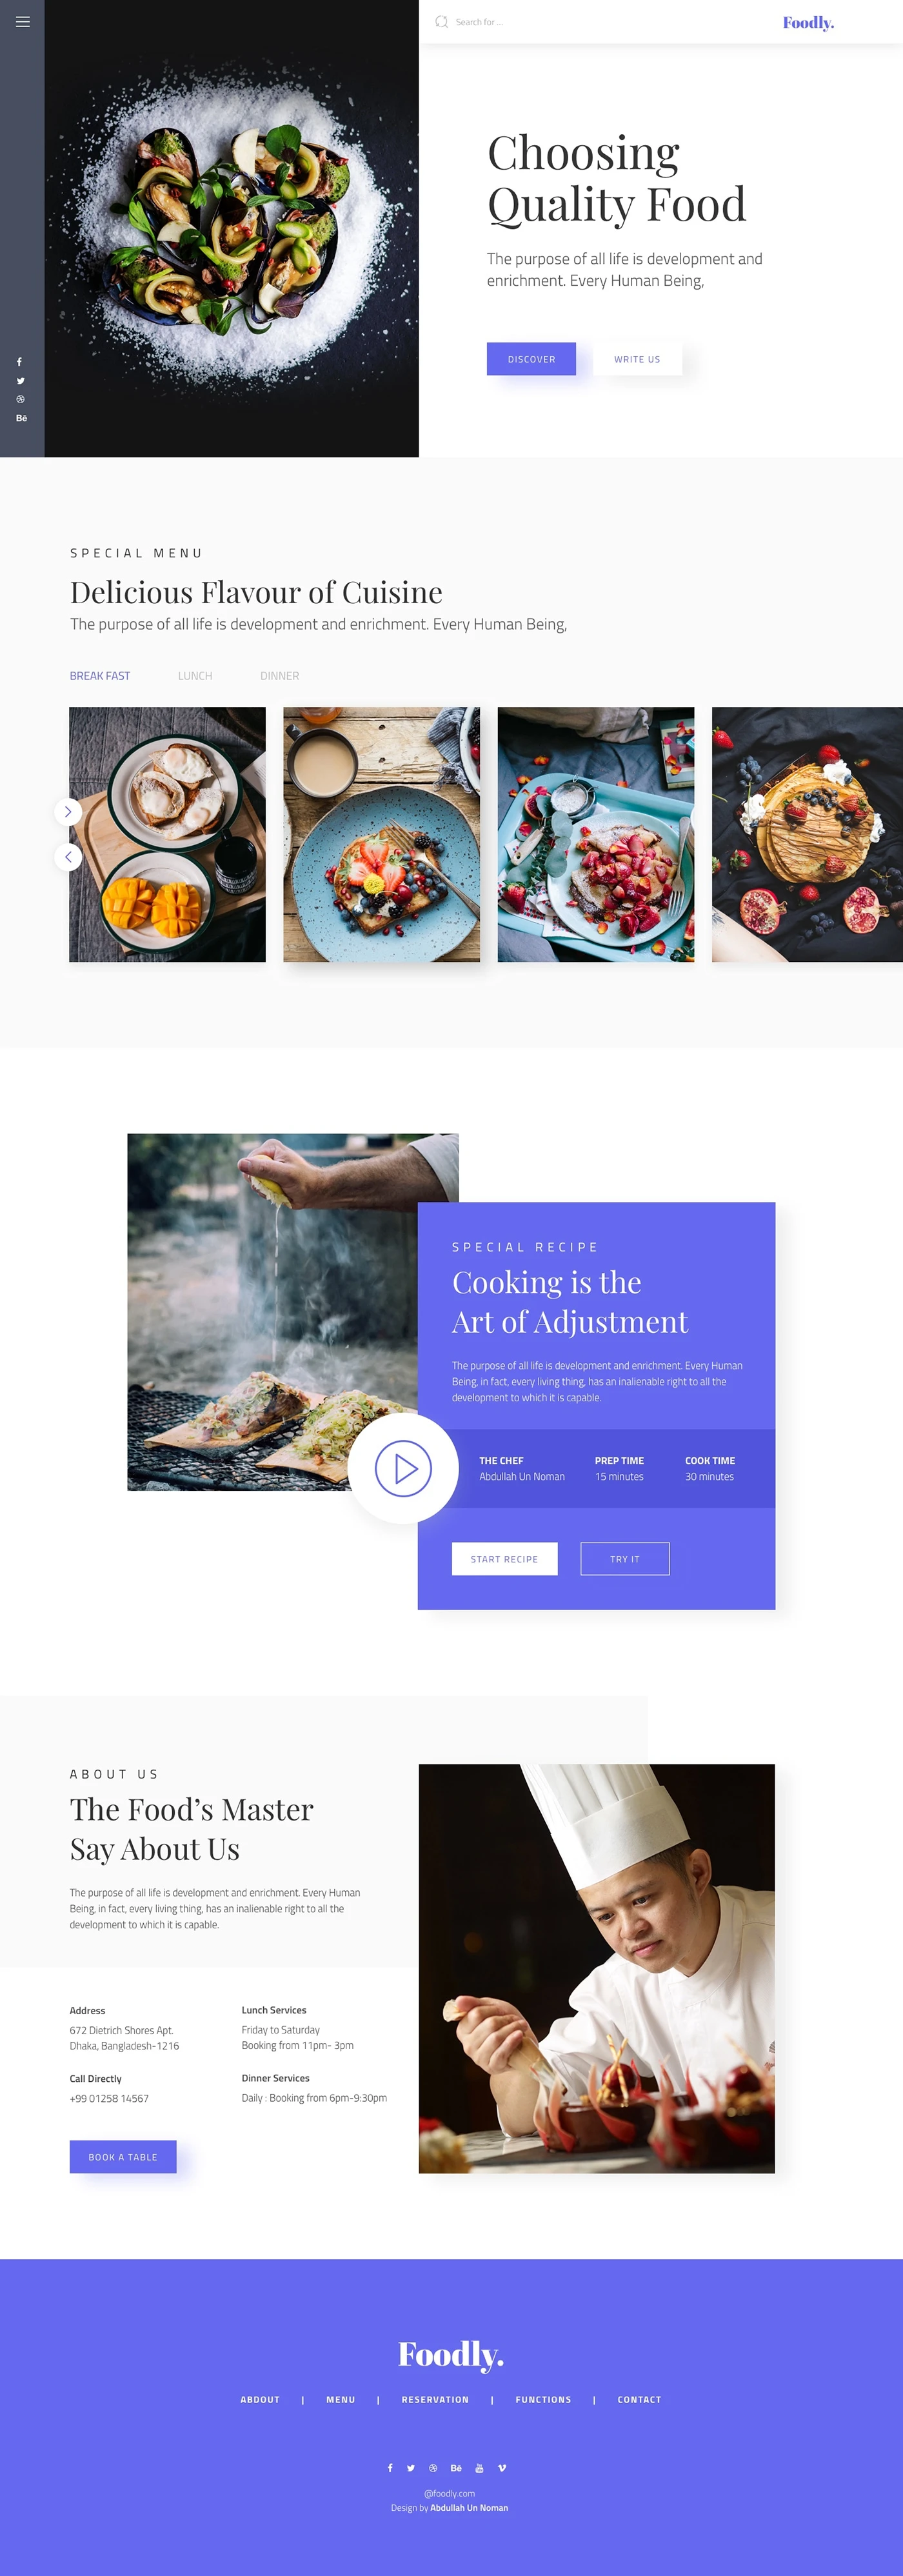 Foodly Landing Page - Clean and beautiful landing page, designed by Abdullah Un Noman